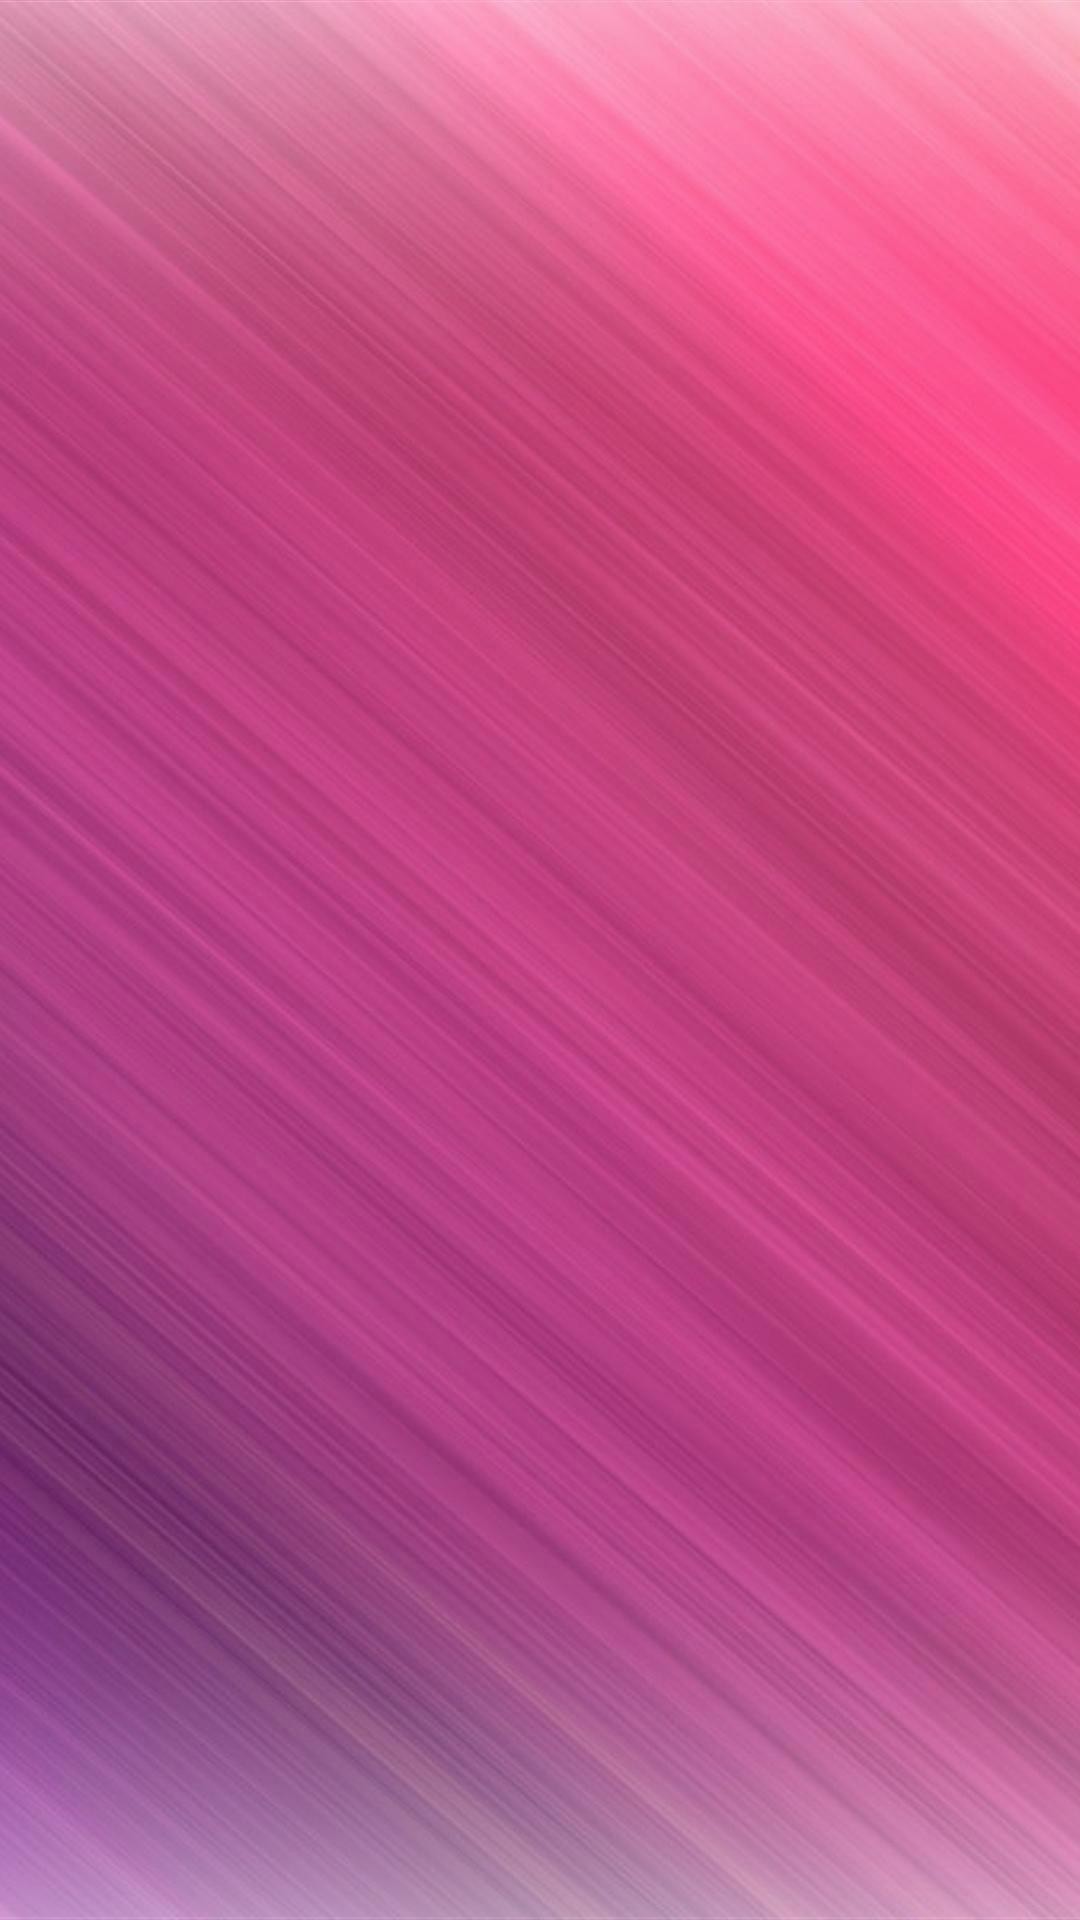 1080x1920 wallpaper.wiki-Free-Download-Cool-Pink-Iphone-Background-